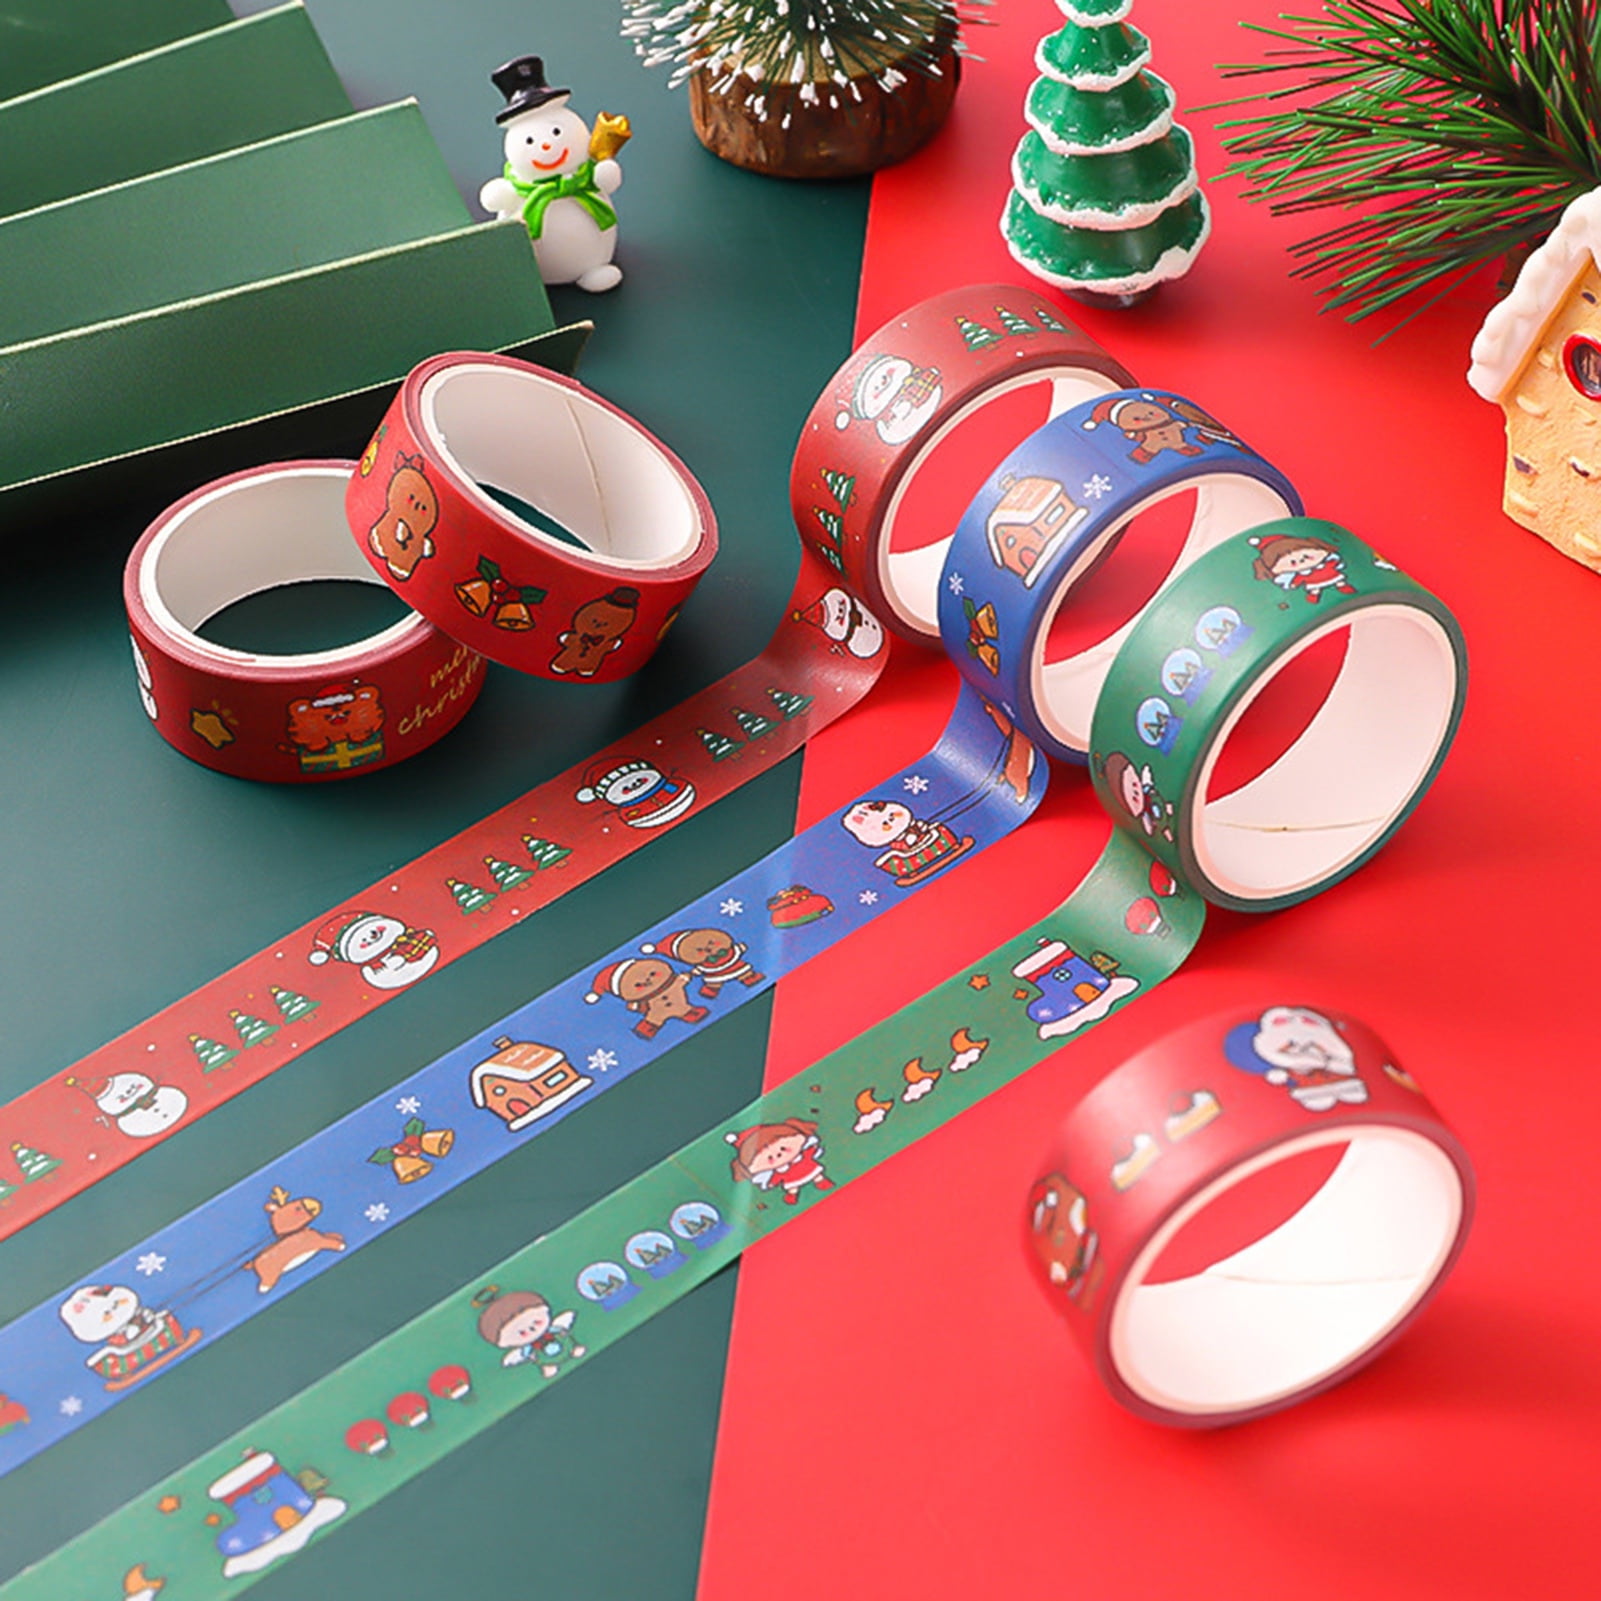 Craft Projects. Christmas Washi Tapes 48 Rolls-15mm Wide Masking Tape Set Covering Different Christmas Holiday Patterns for DIY Christmas Card Tree Decoration Scrapbooking Gift Packaging 